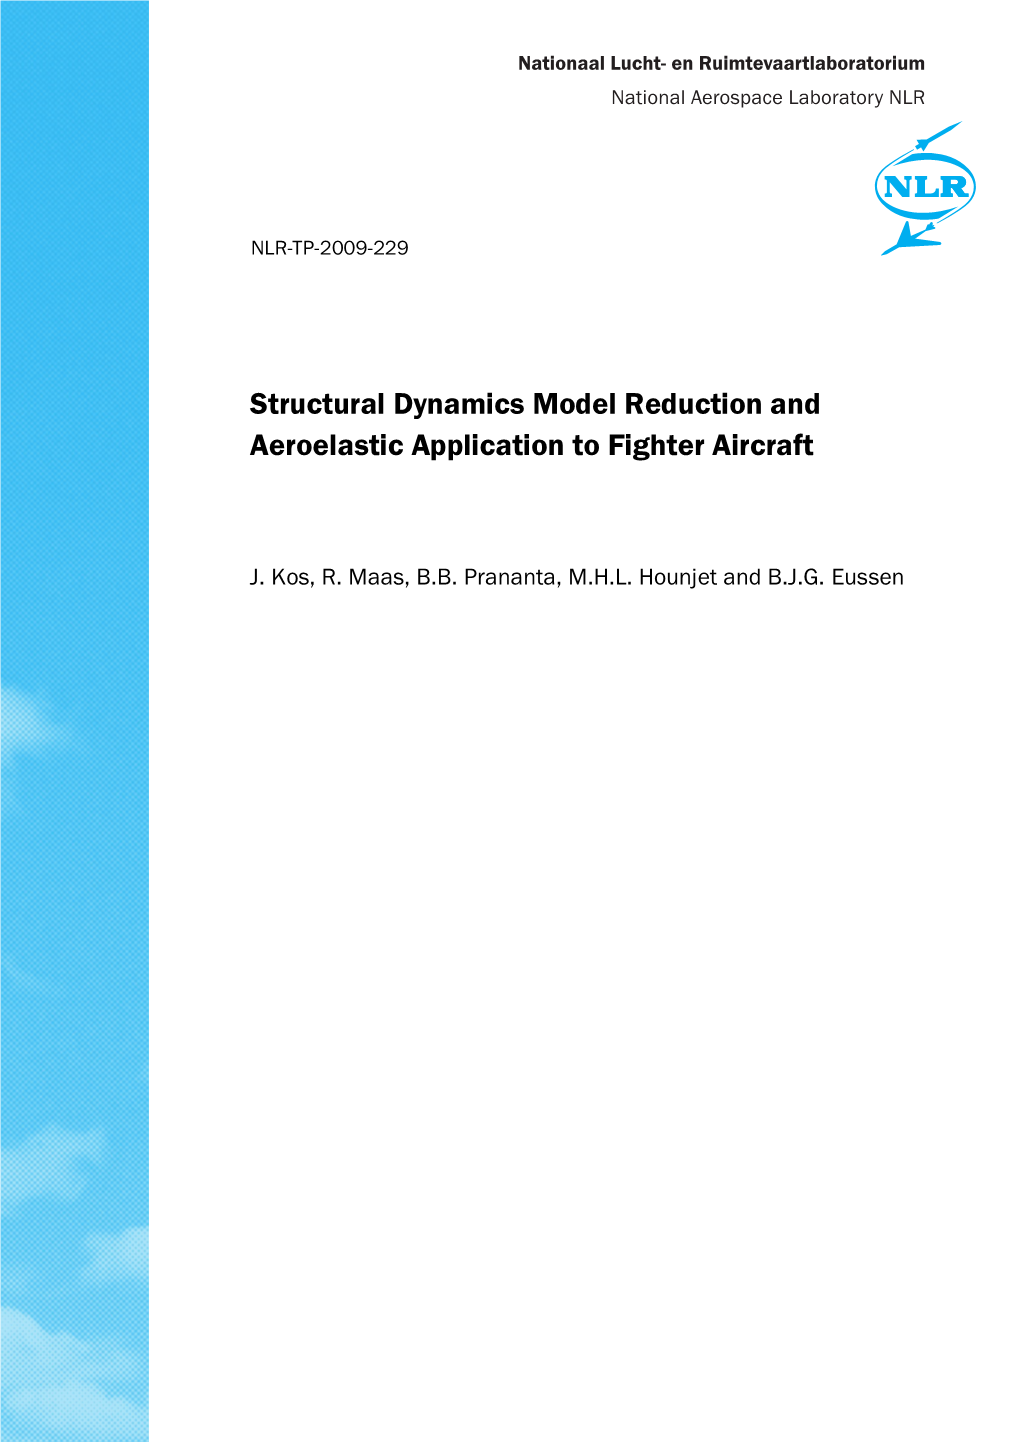 Structural Dynamics Model Reduction and Aeroelastic Application to Fighter Aircraft